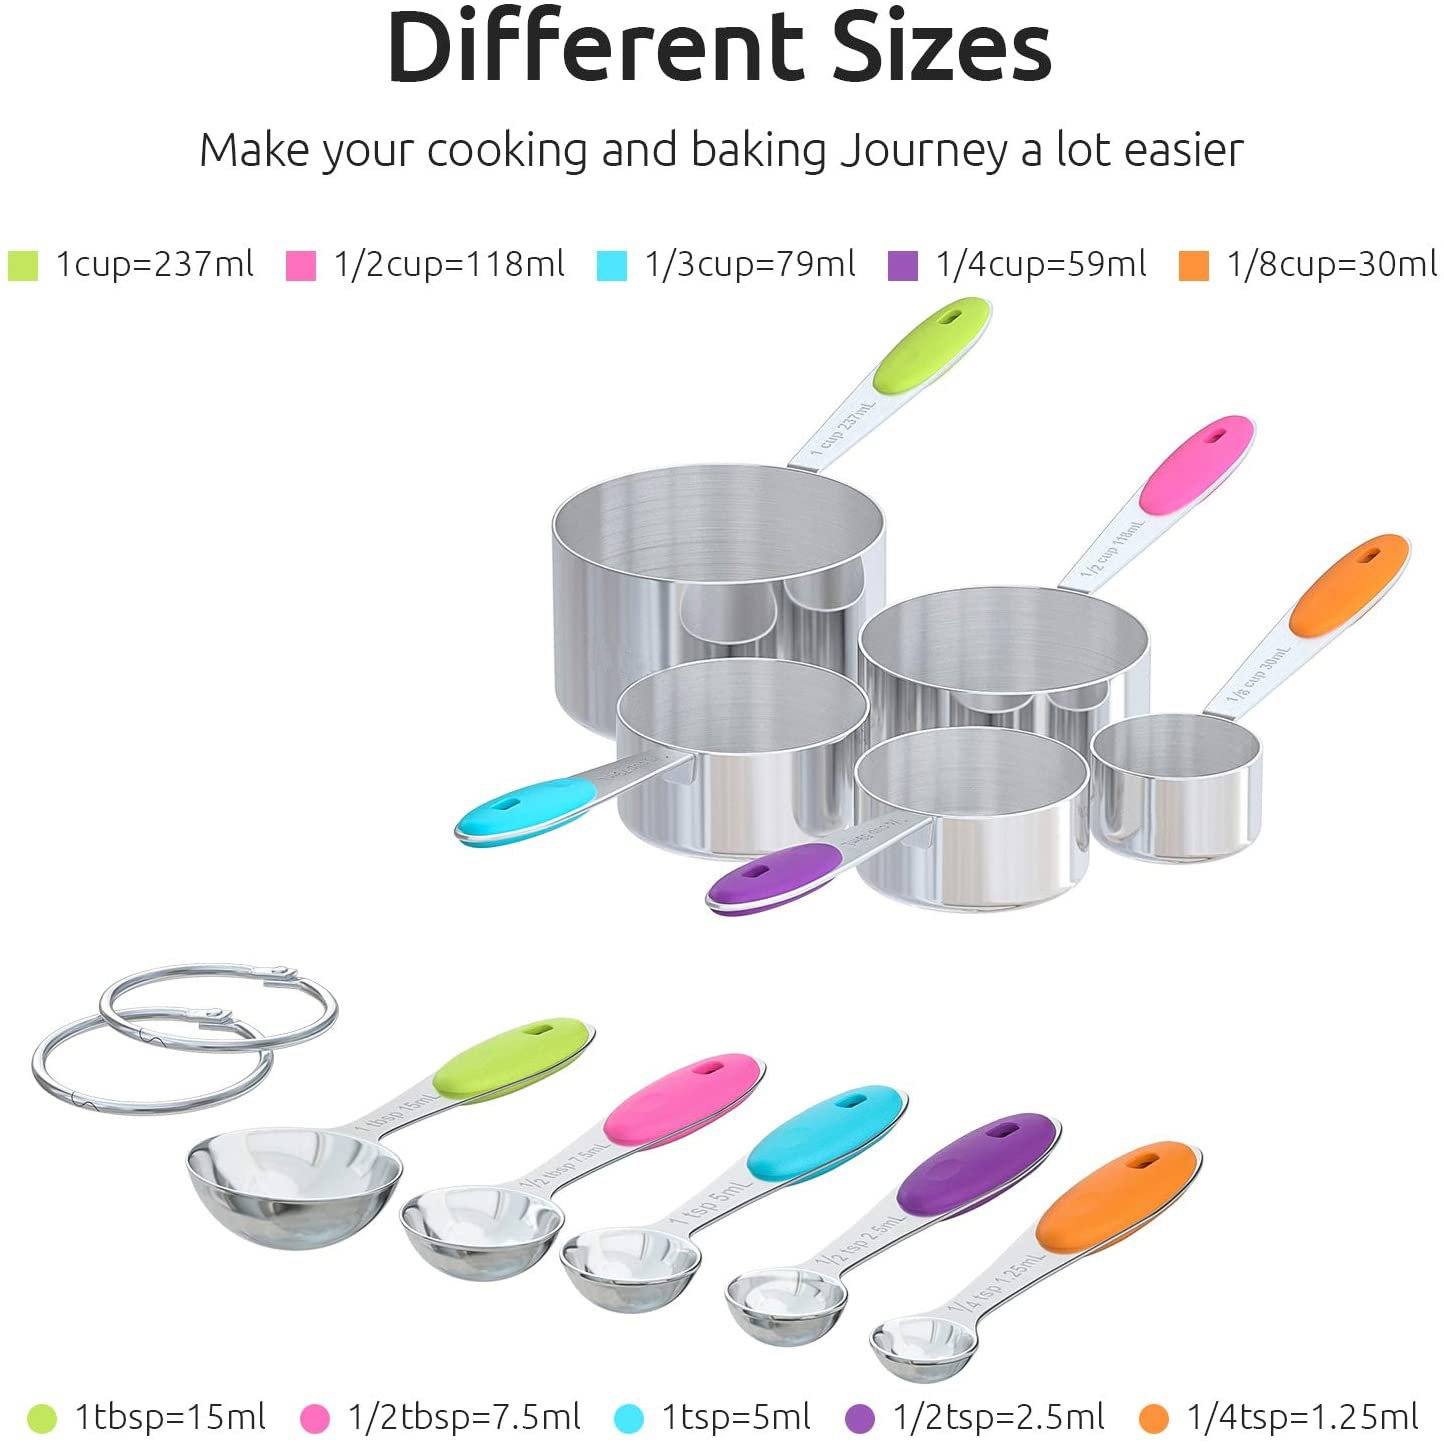 Measuring Cups and Spoon (Multicolored) - 10 piece Set